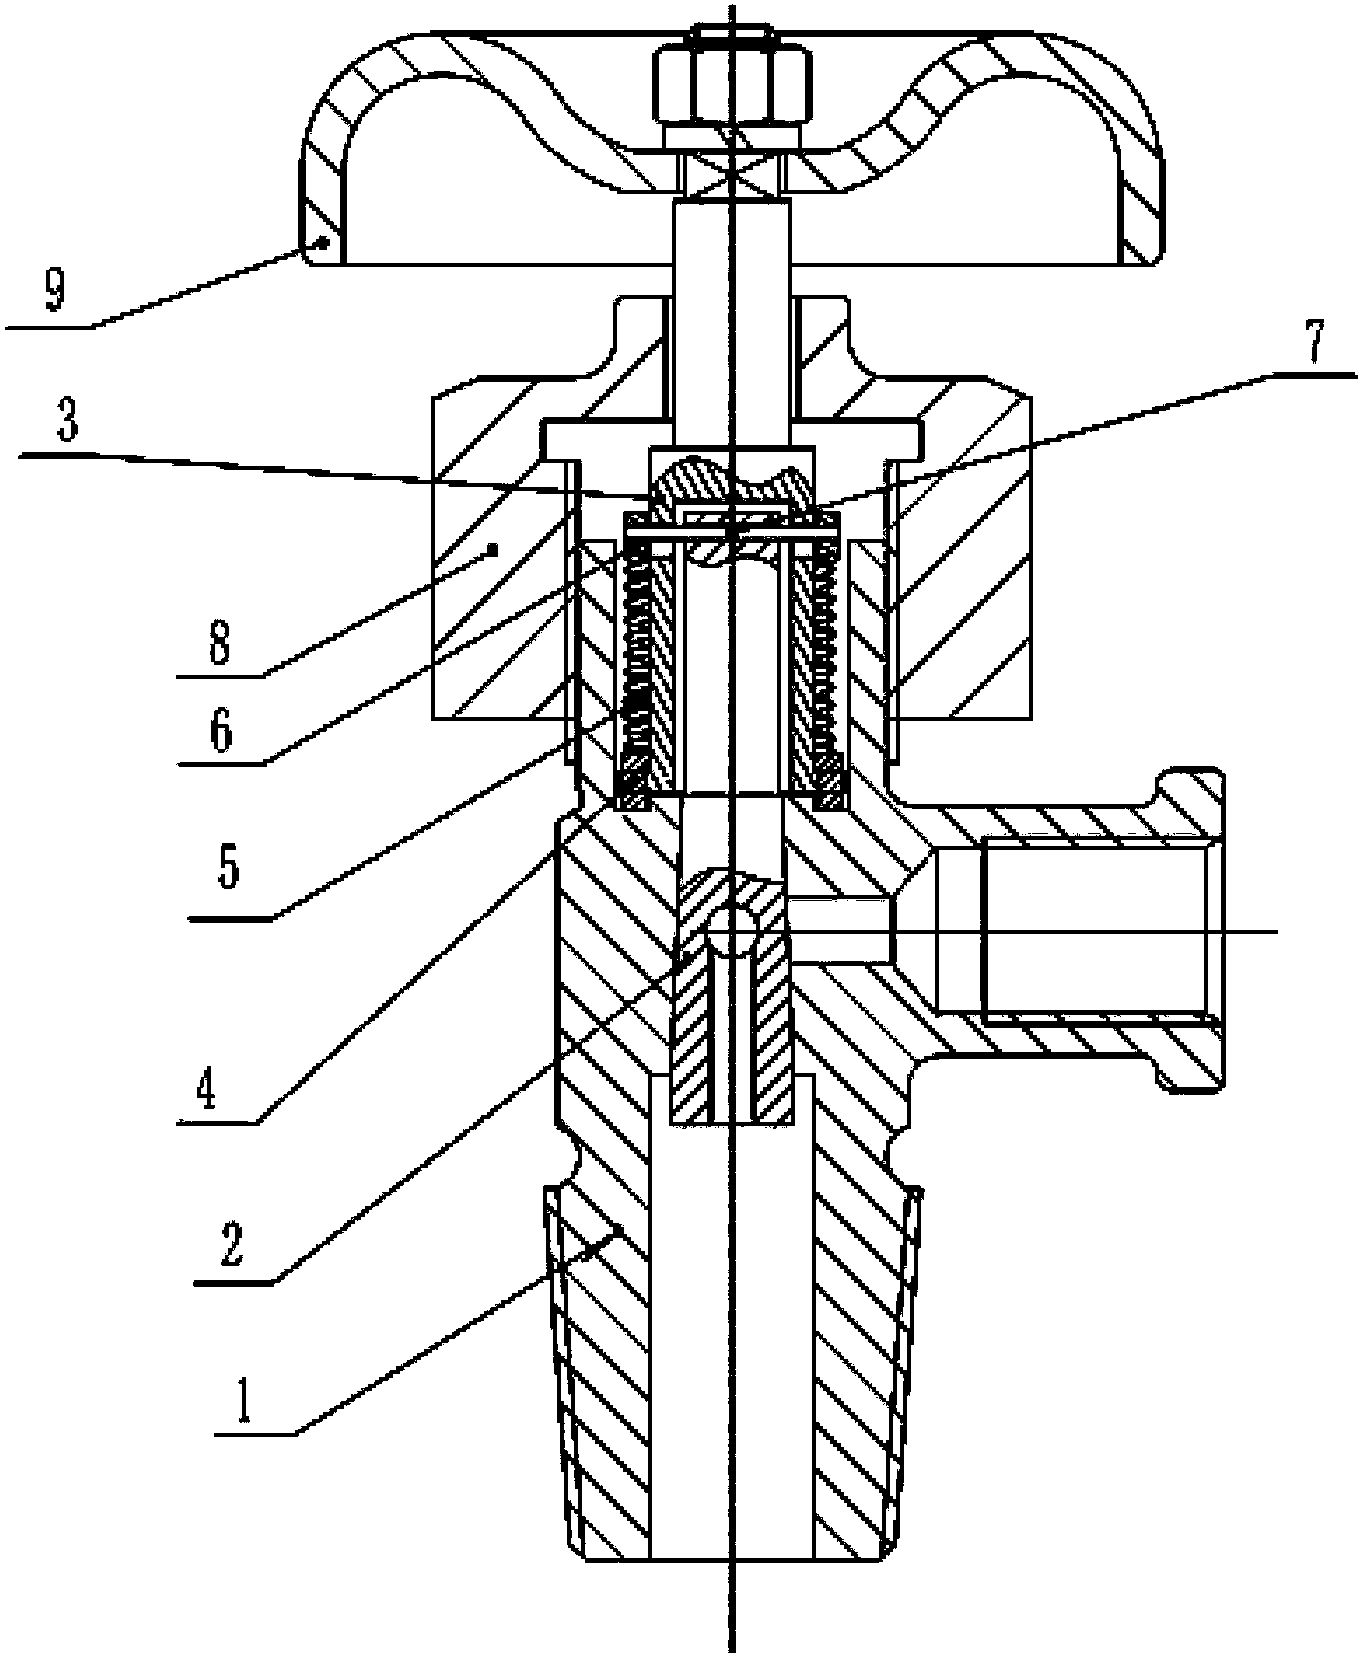 Pressure vessel valve capable of avoiding error opening and suitable for automatic blocking